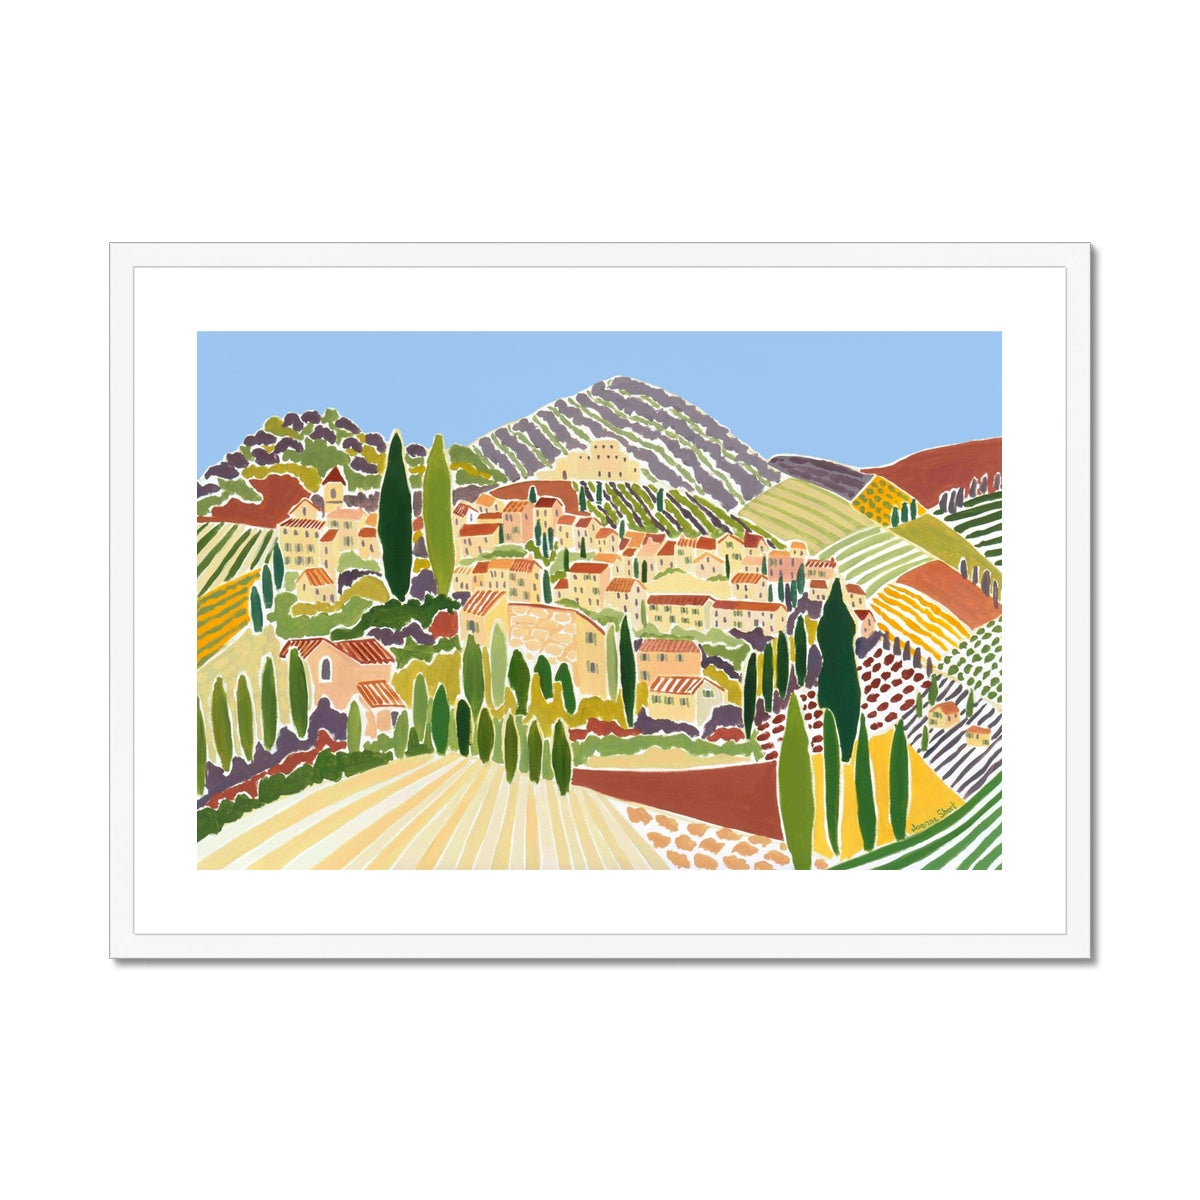 Joanne Short Framed Open Edition French Art Print. 'The Old Town, Vaison La Romaine, Provence'. French Art Gallery